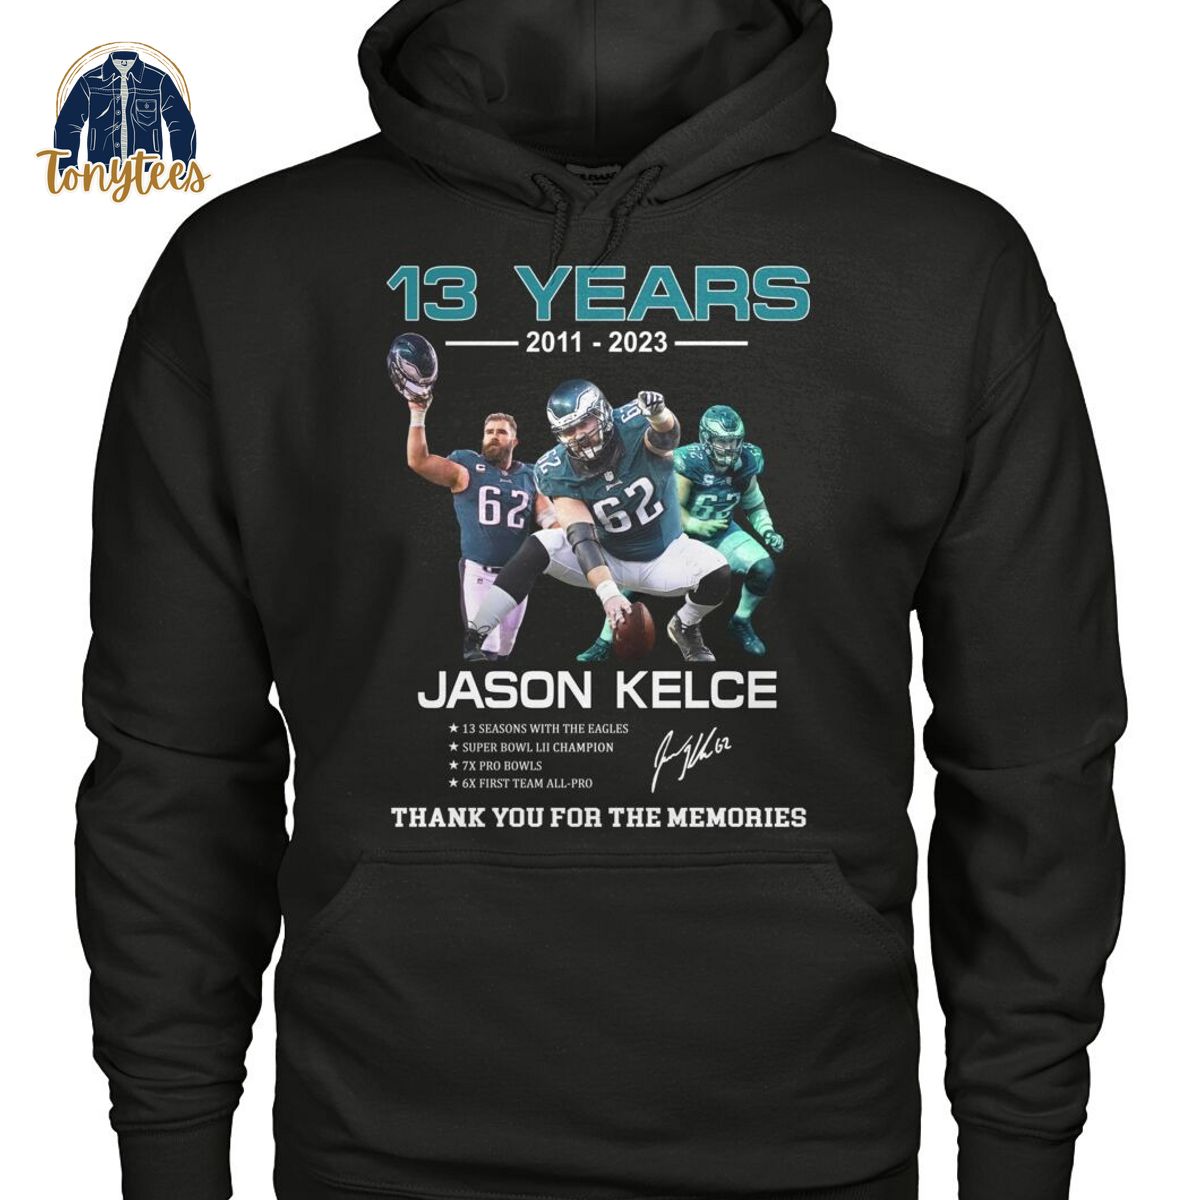 13 years Jason Kelce thank you for the memories shirt